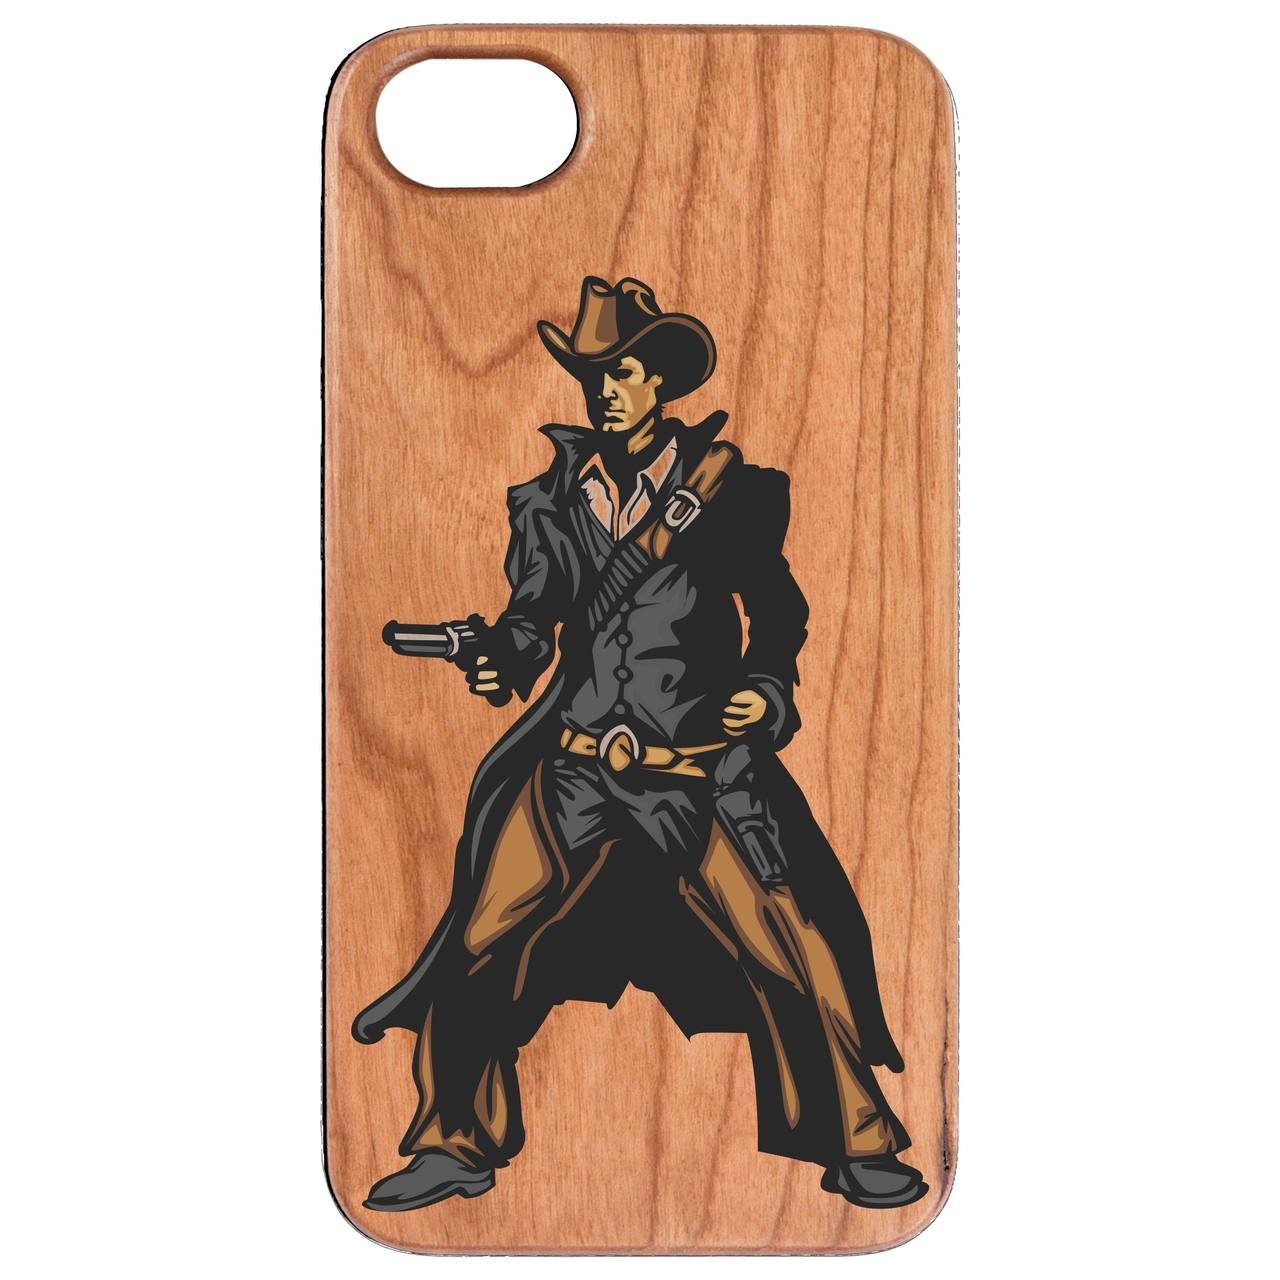  Cowboy - UV Color Printed - Wooden Phone Case - IPhone 13 Models